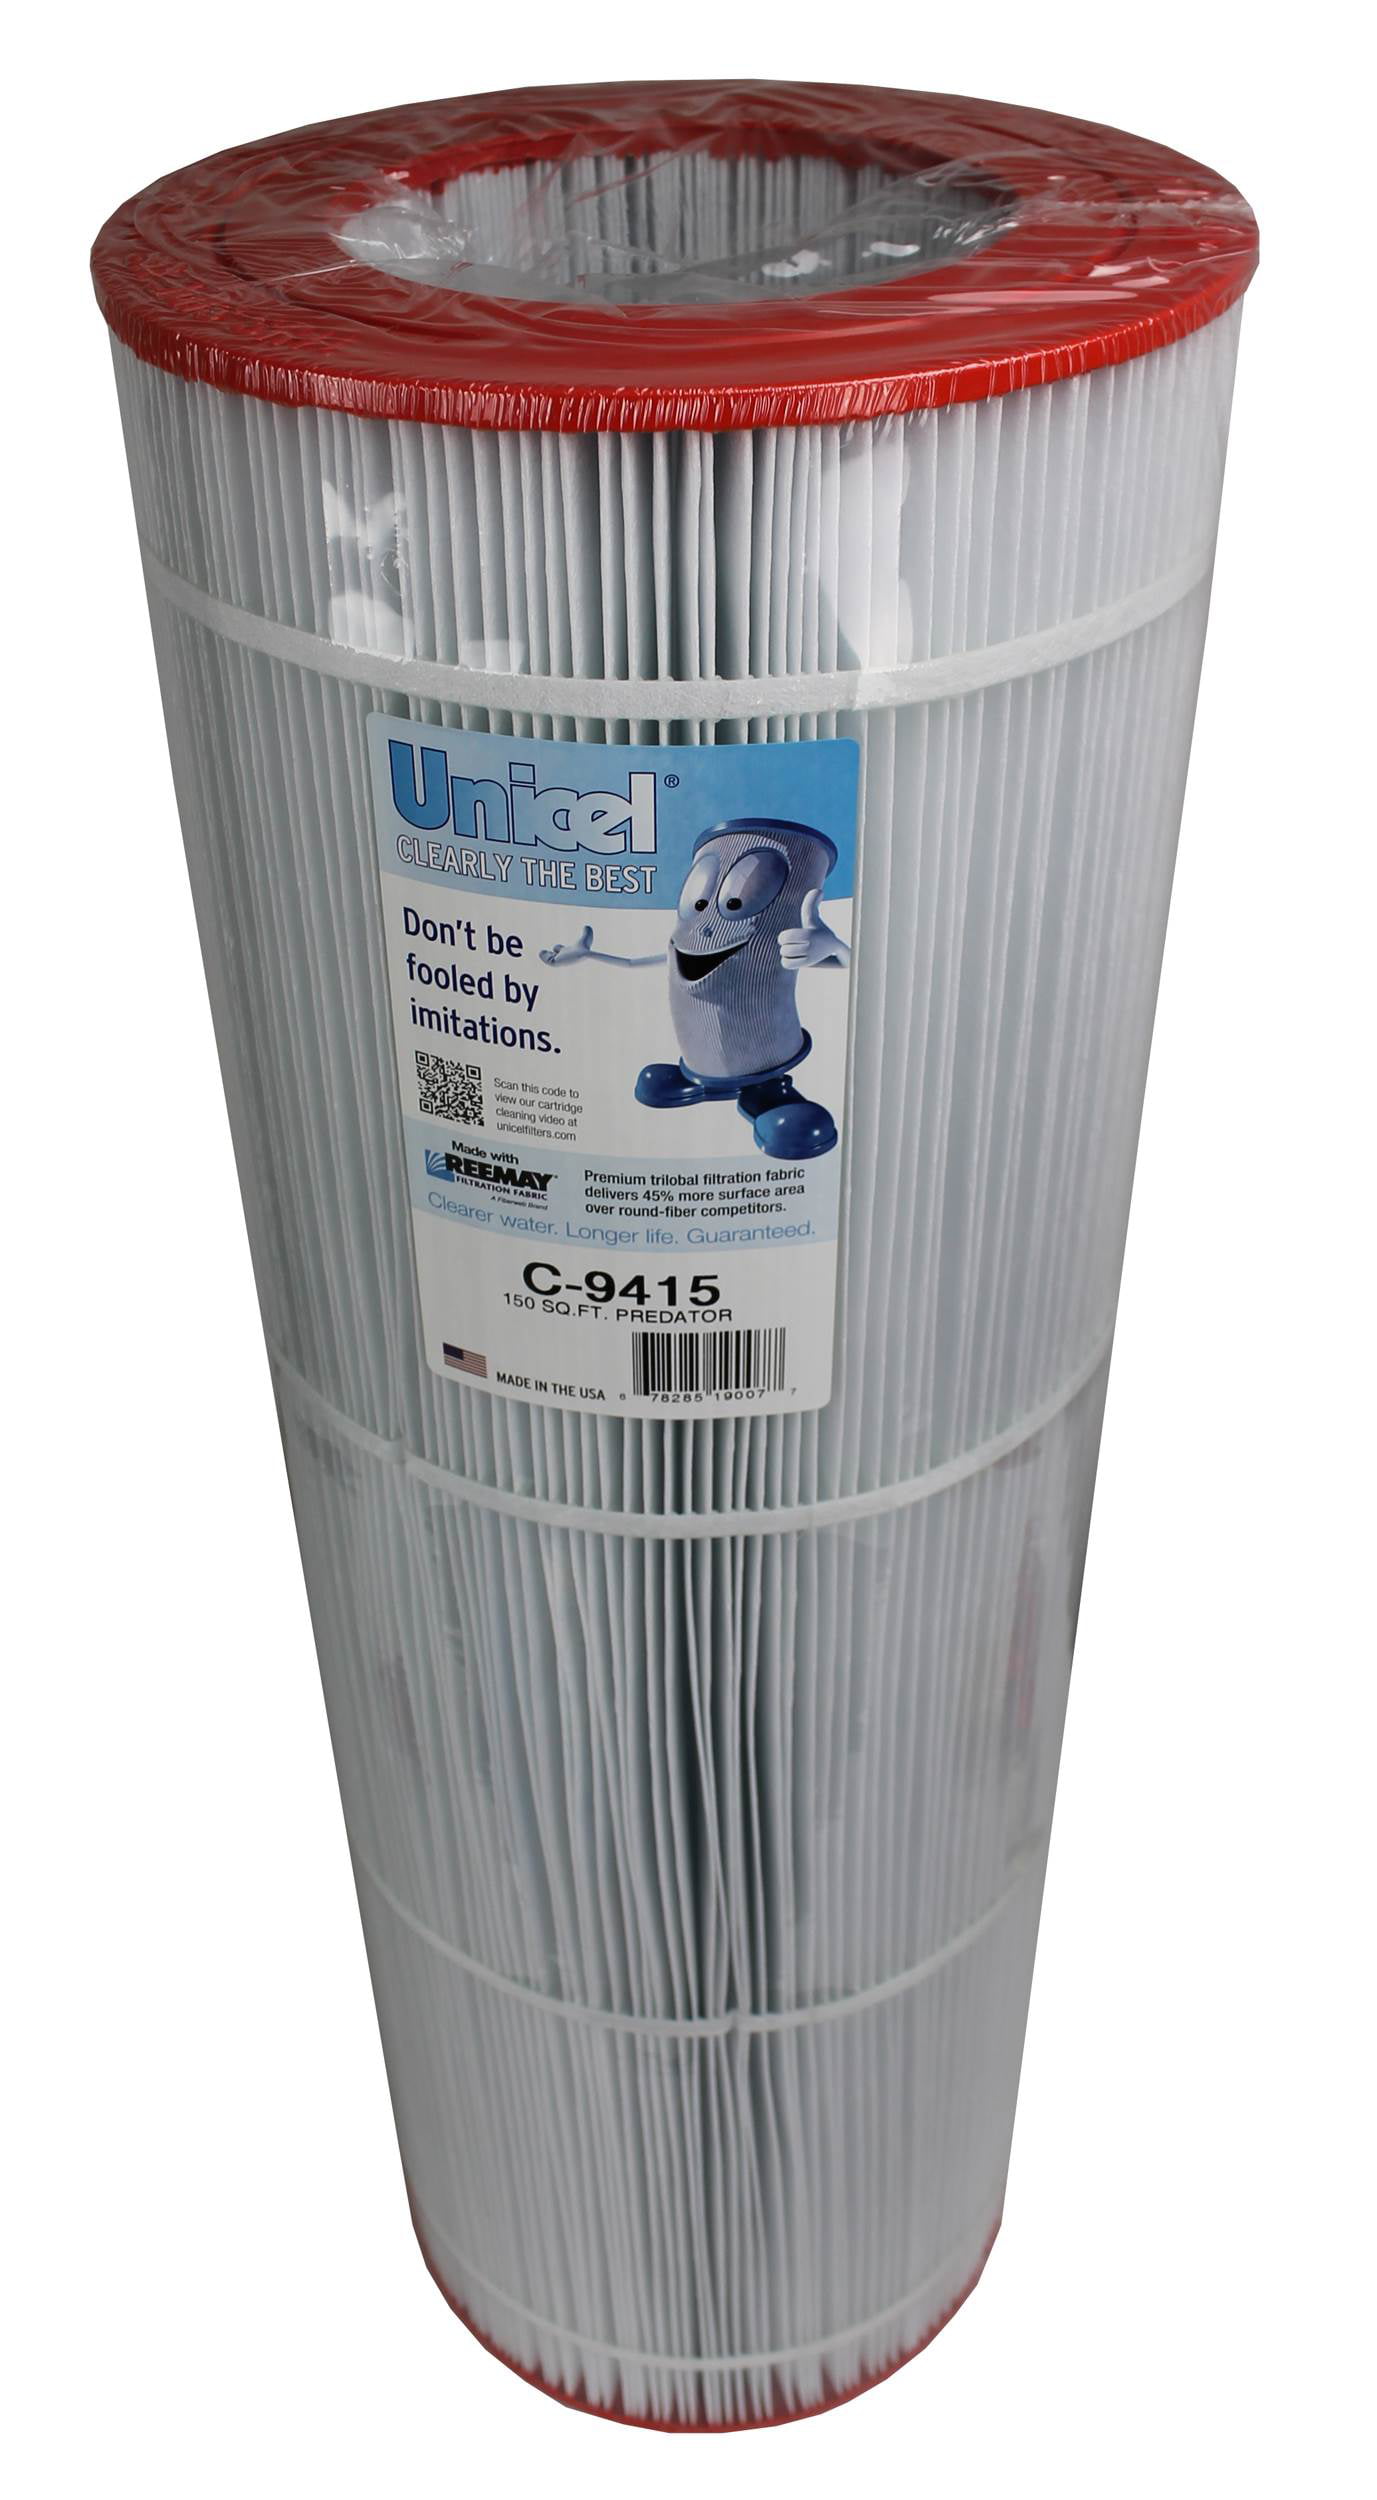 Pleatco PSD40-4 ft Pool Filter Replaces Unicel C-4440 Baleen Filters 40 sq Filbur FC-2710-Pool and Spa Filter Cartridges Model: AK-3031 